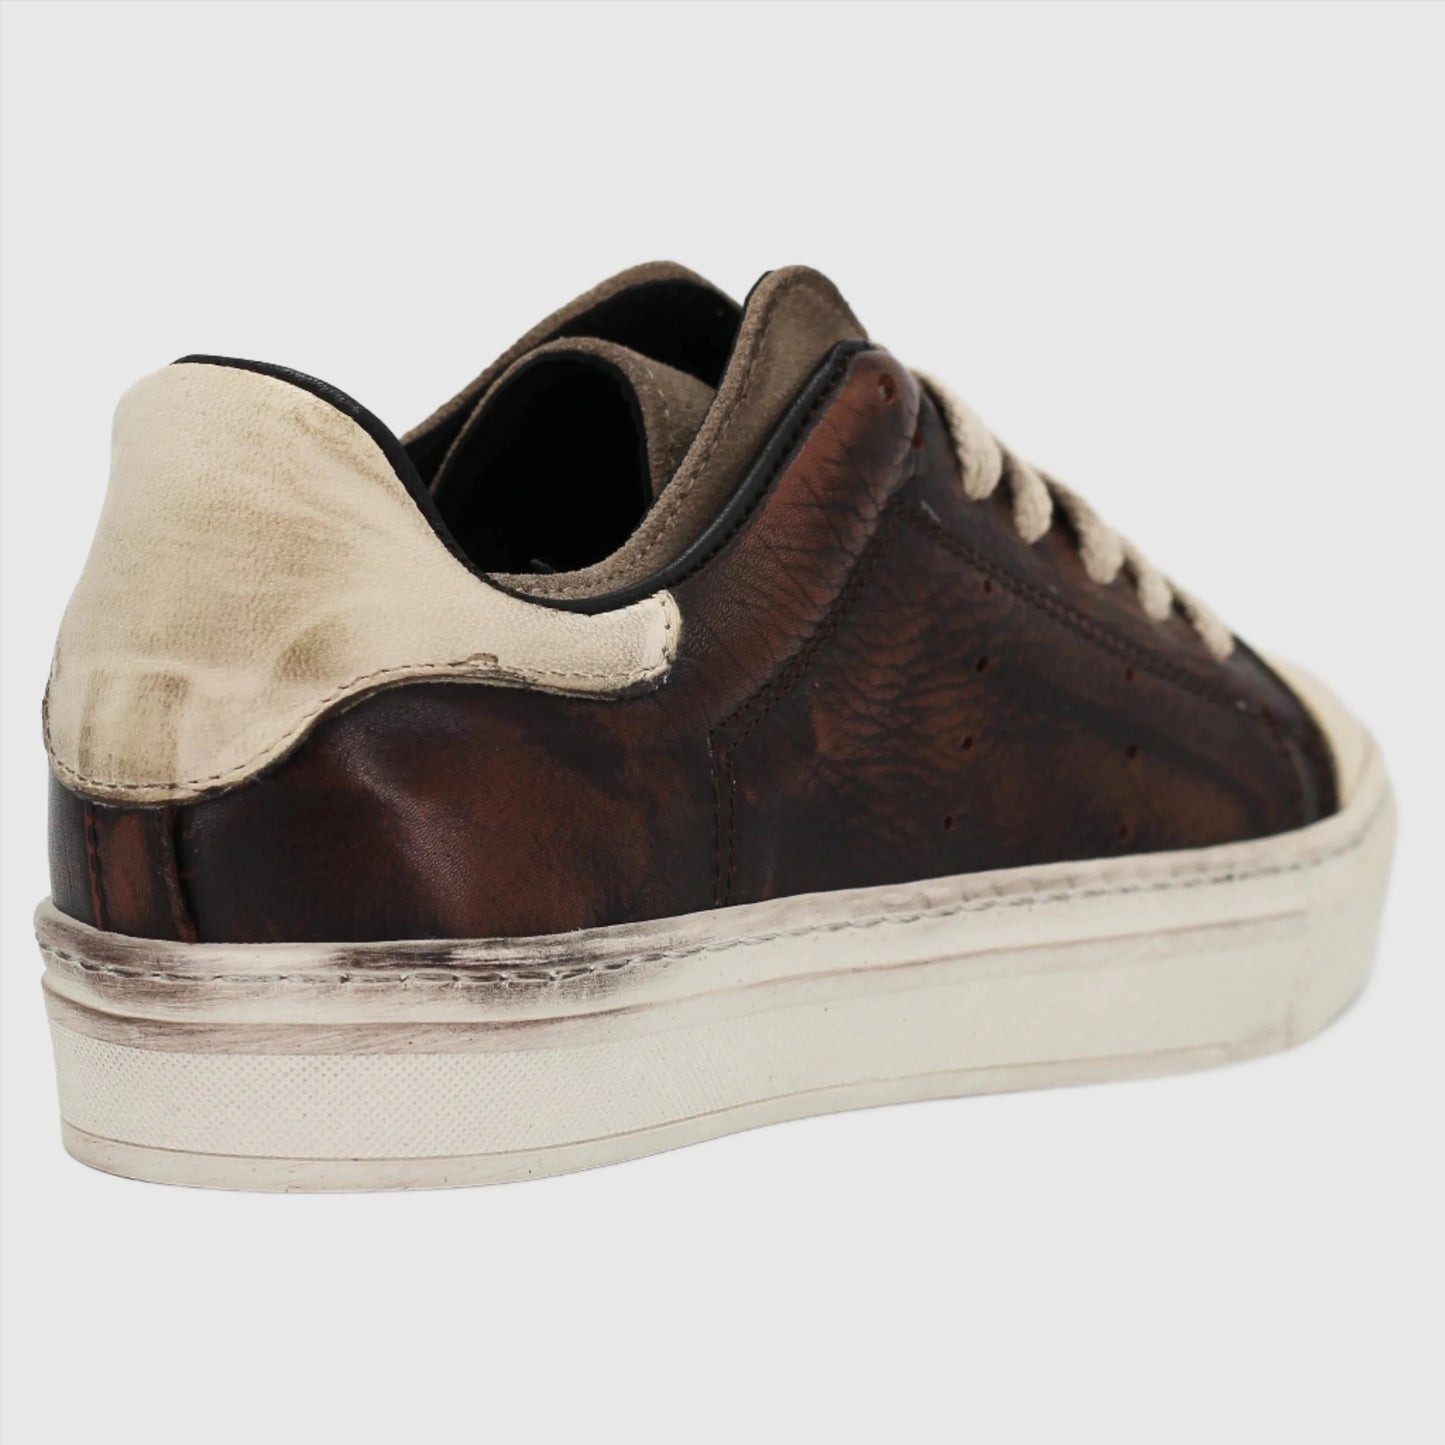 Shop Handmade Italian Leather Sneaker in Cognac (GRD700/1) or browse our range of hand-made Italian shoes in leather or suede in-store at Aliverti Cape Town, or shop online. We deliver in South Africa & offer multiple payment plans as well as accept multiple safe & secure payment methods.